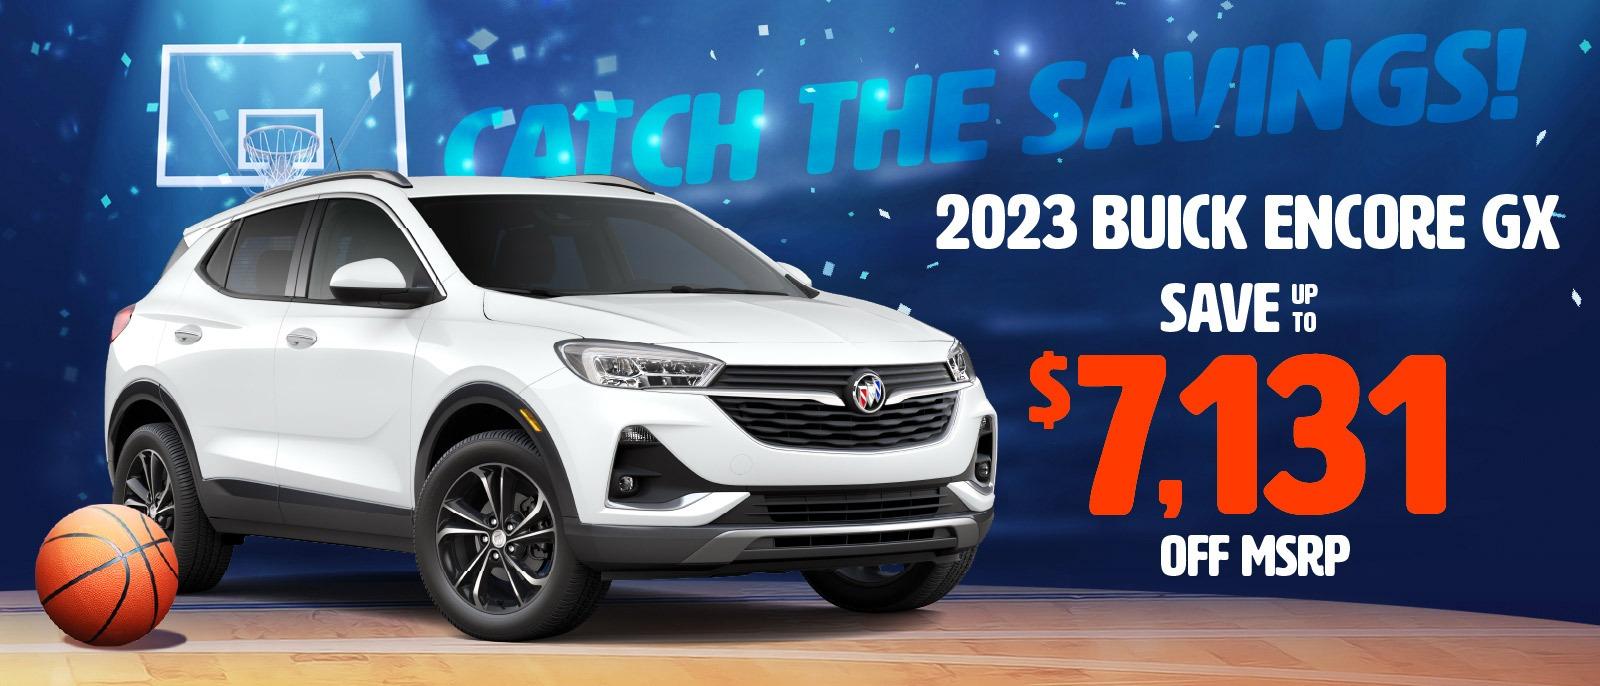 2023 Buick Encore GX - SAVE up to $7131